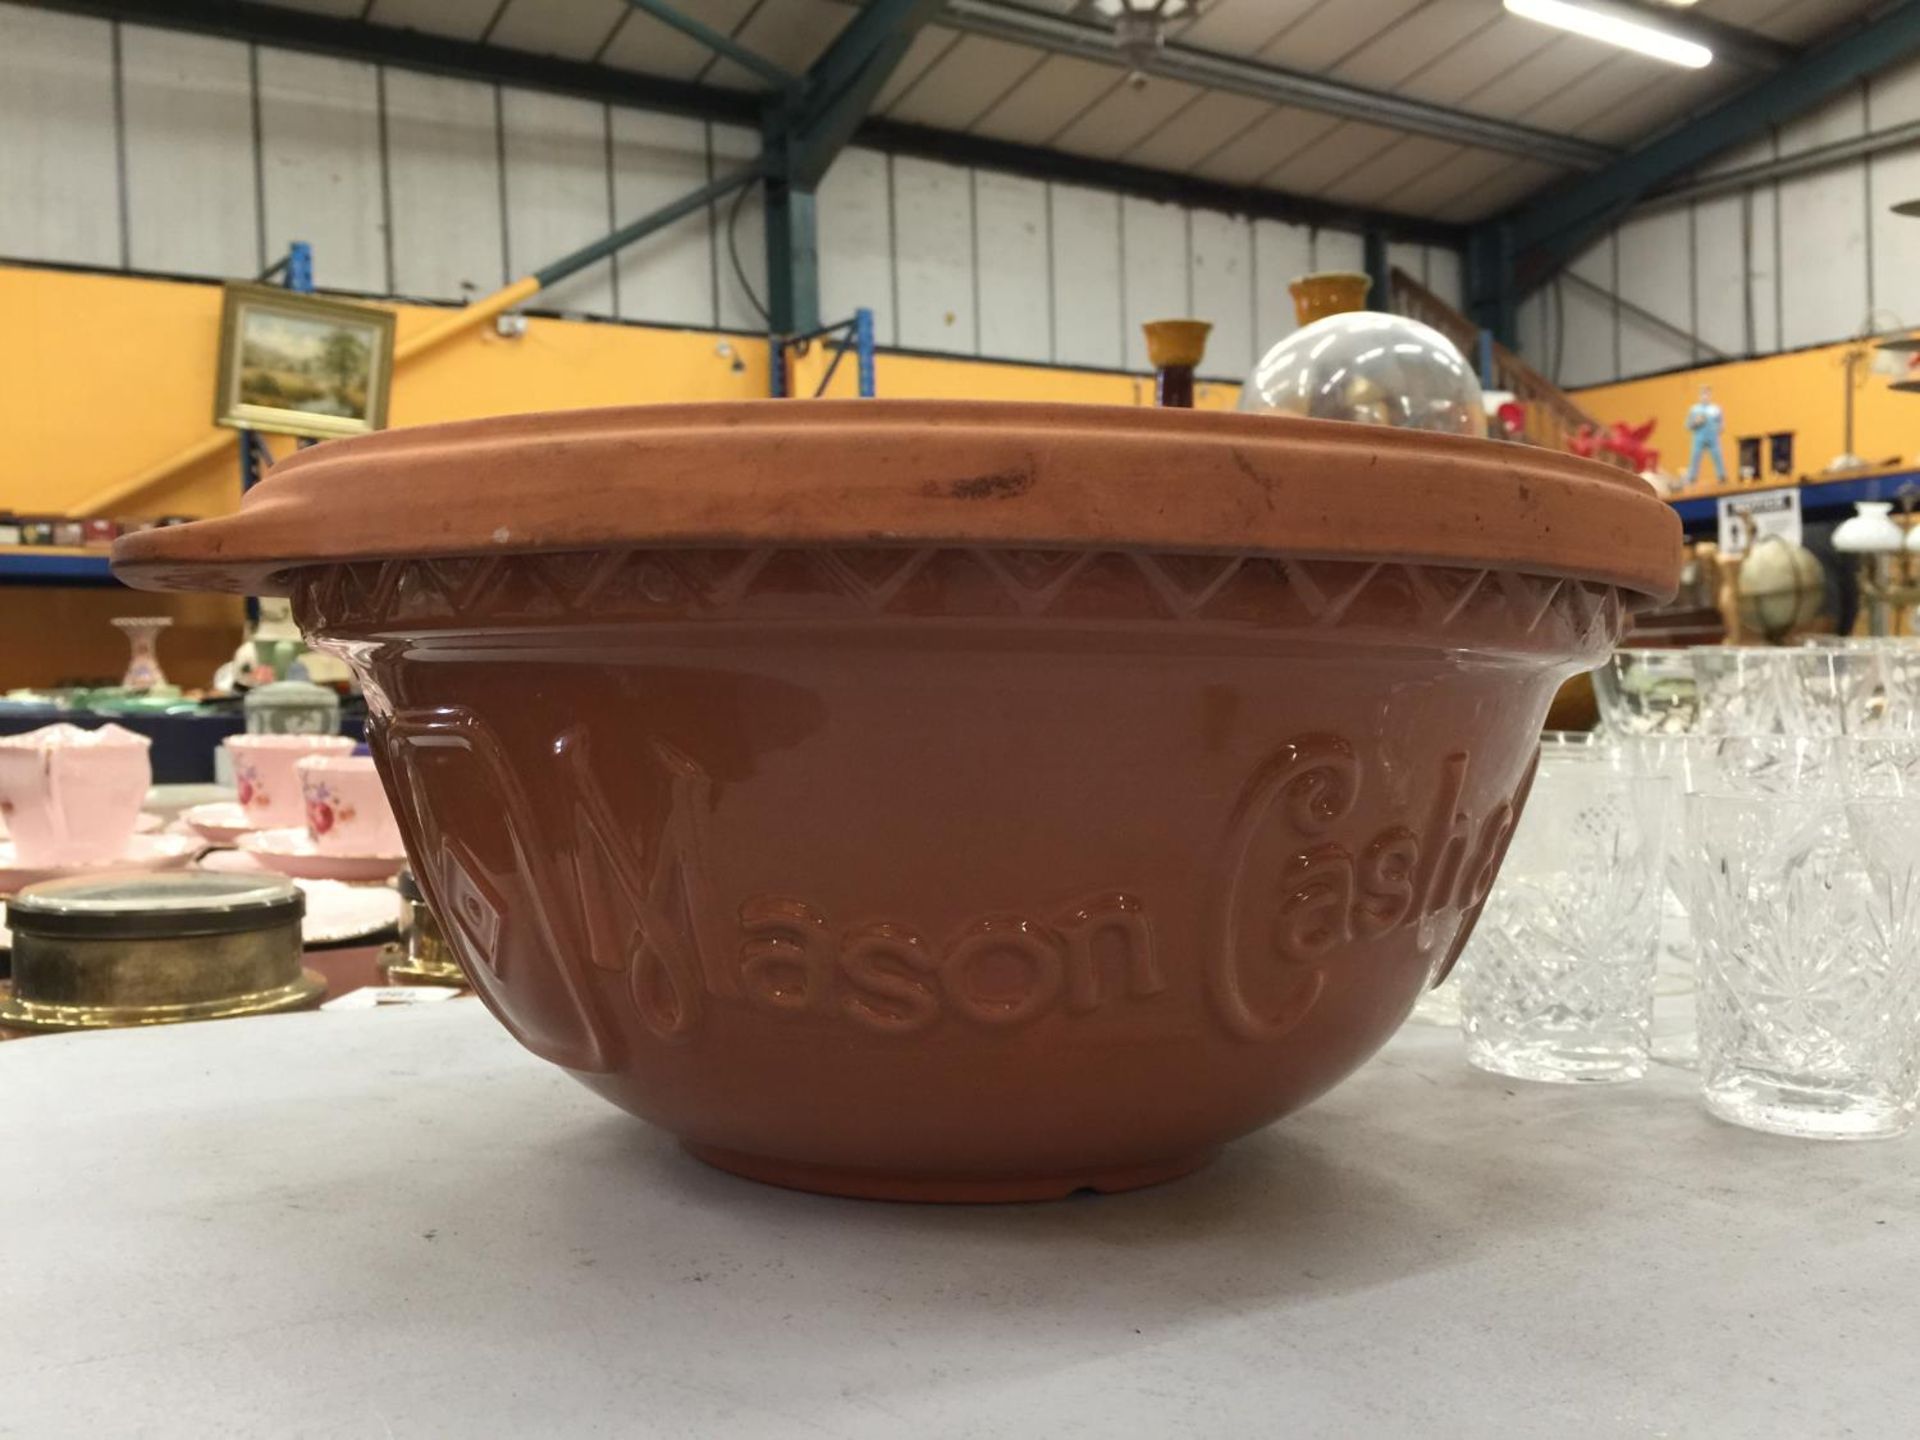 AN ORIGINAL MASON CASH & CO MIXING BOWL AND COVER - Image 5 of 6